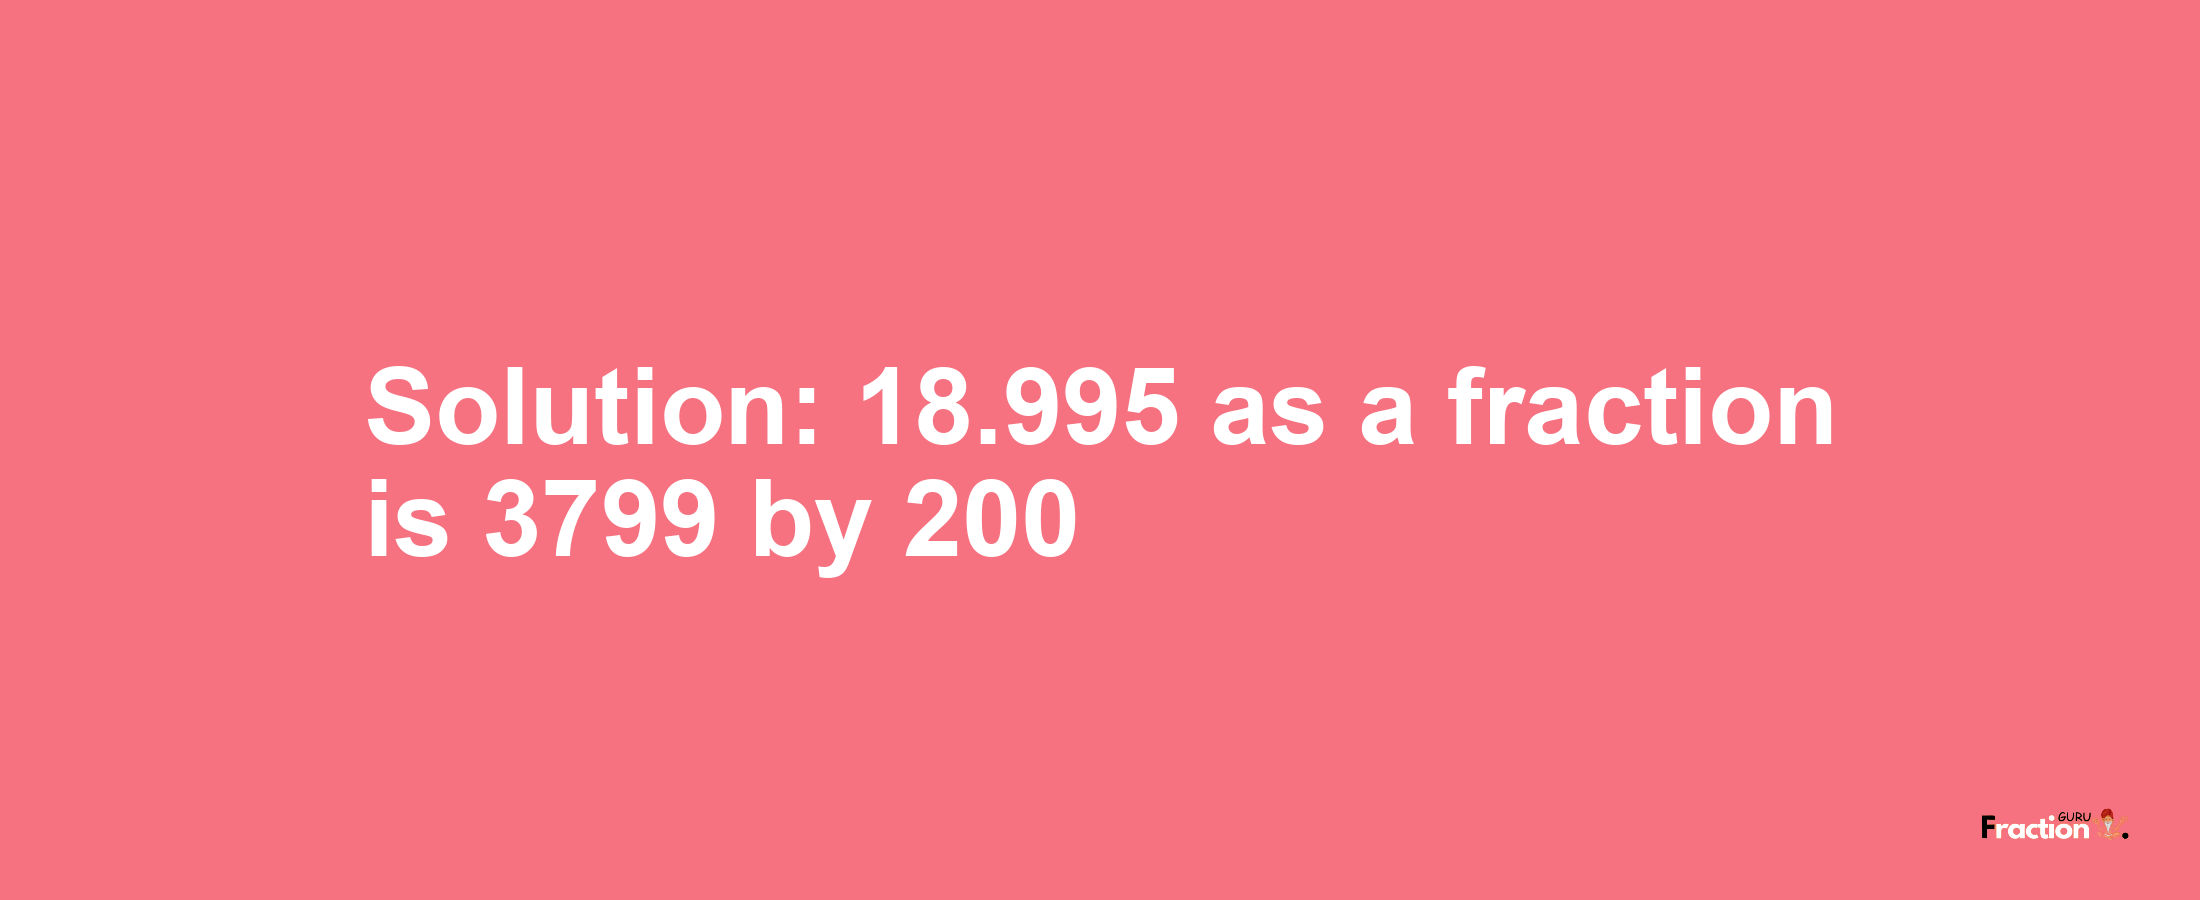 Solution:18.995 as a fraction is 3799/200